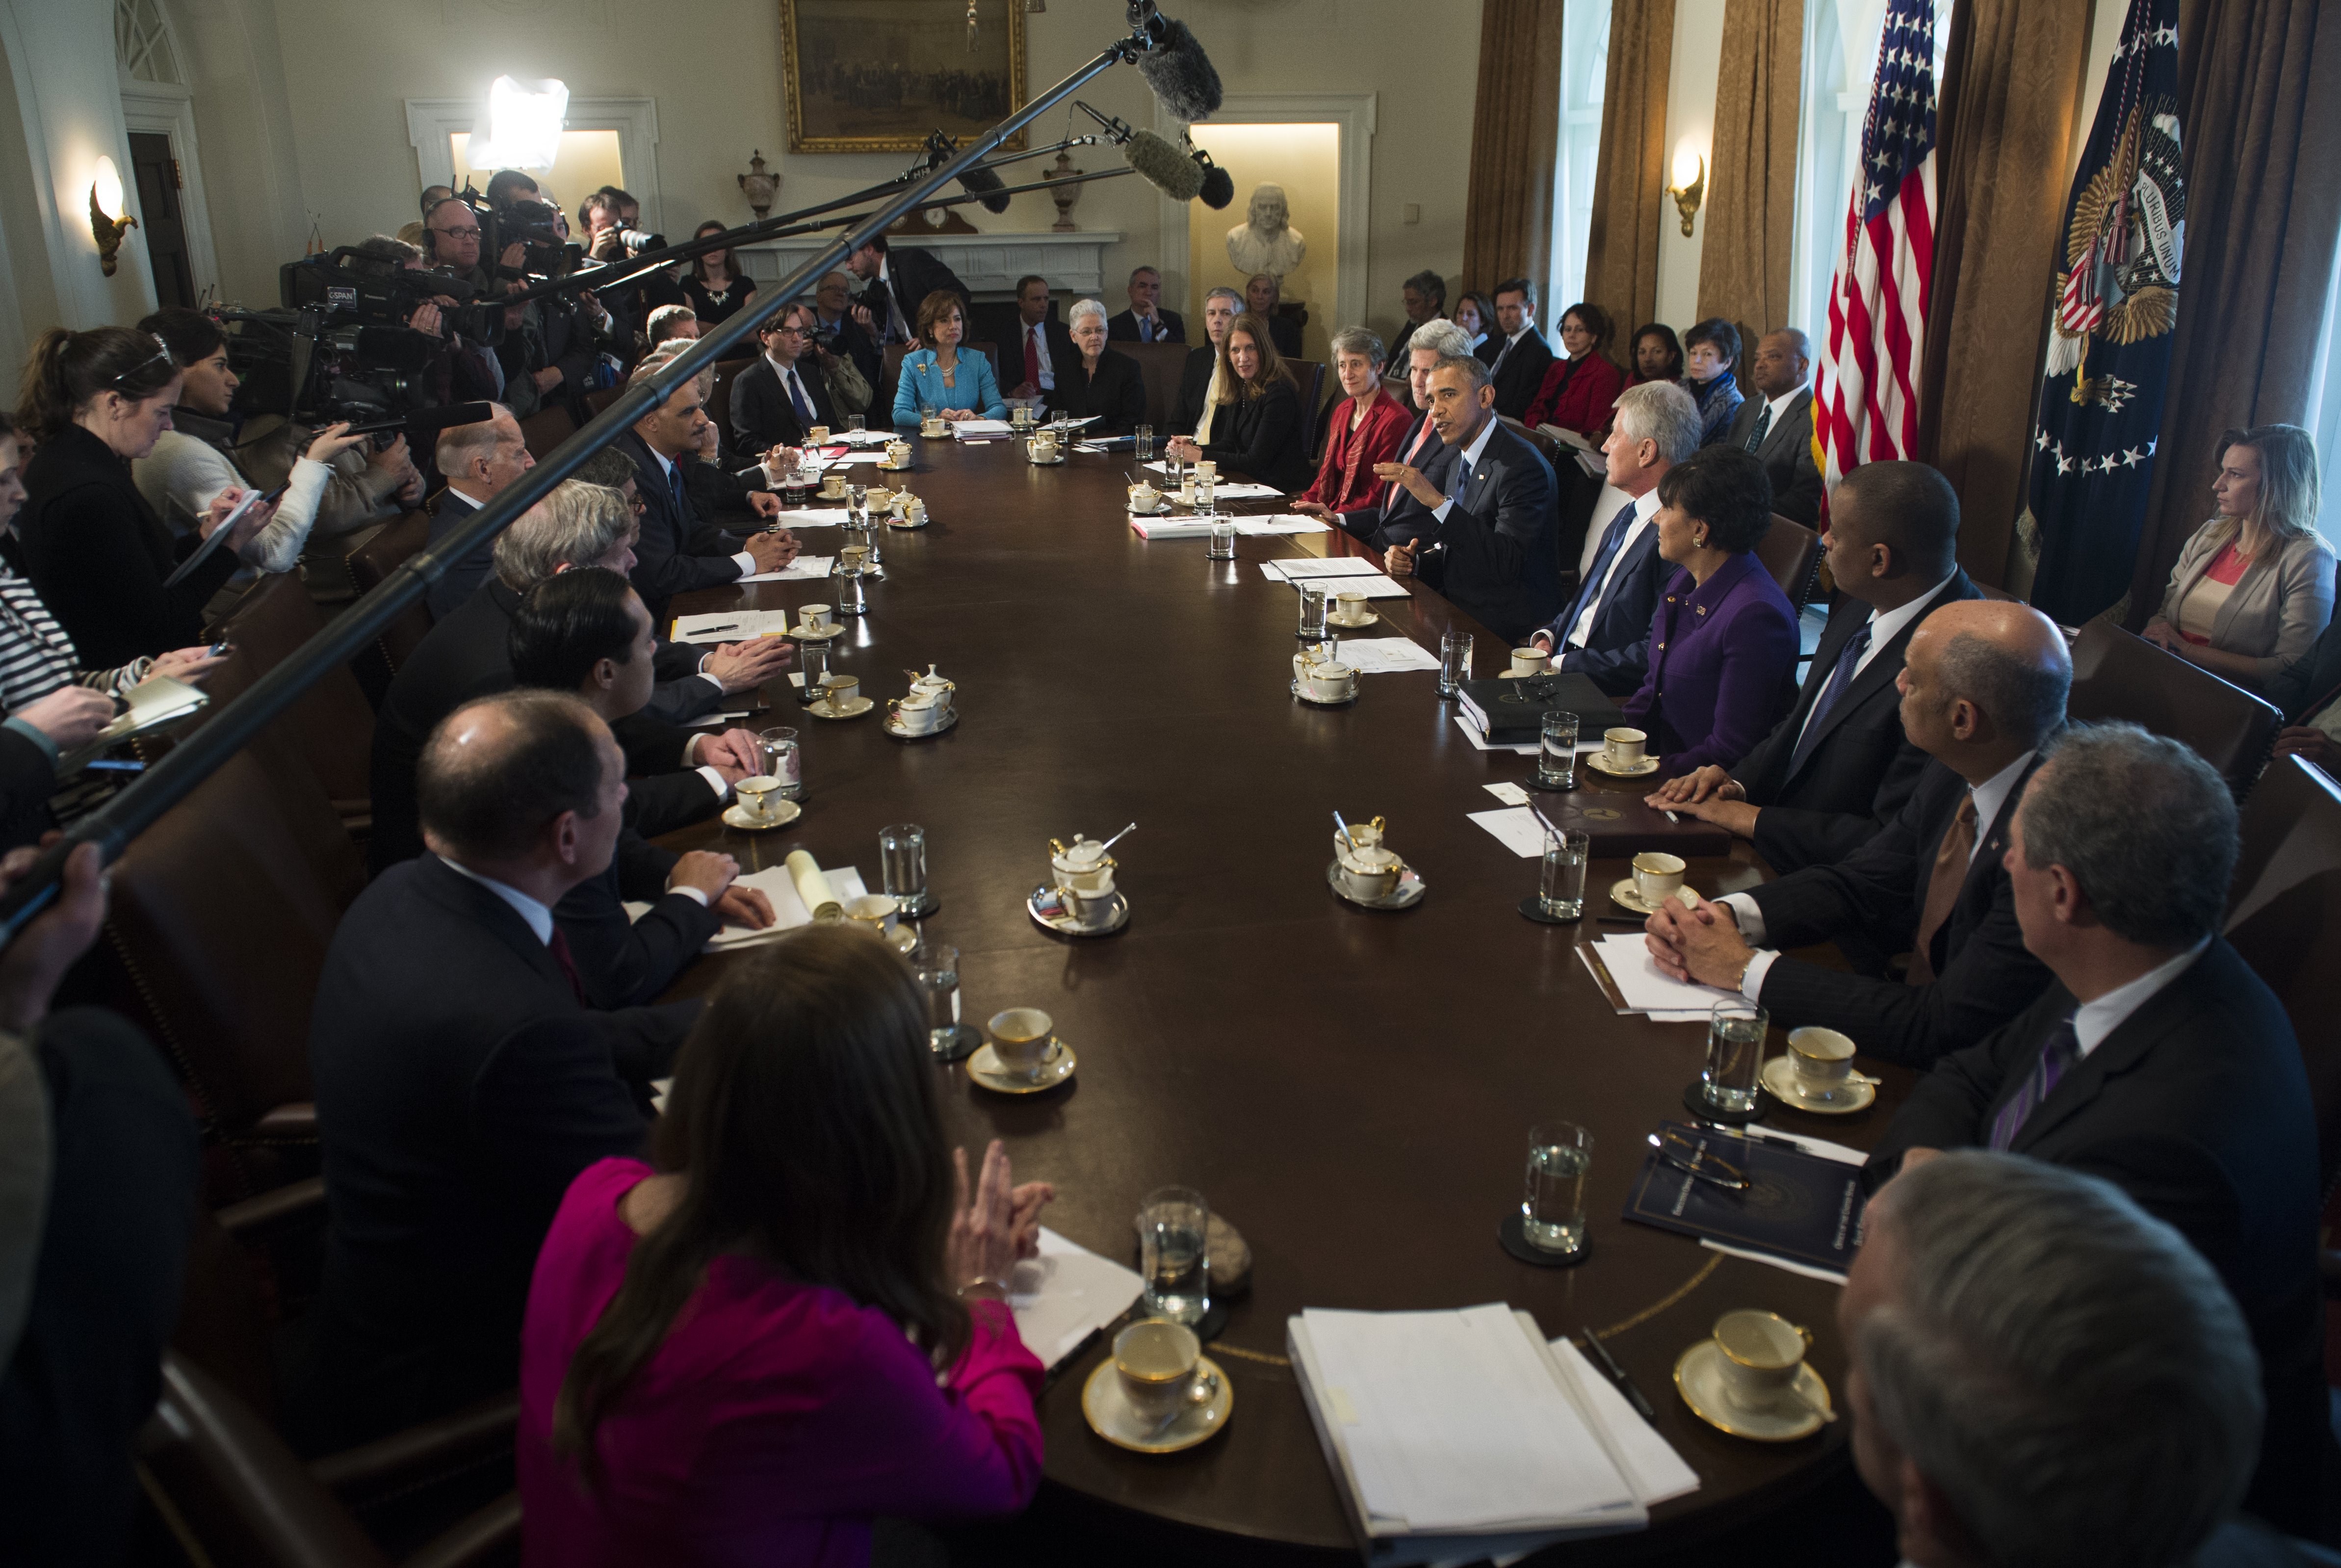 US President Barack Obama speaks during a Cabinet Meeting in the Cabinet Room of the White House in Washington on Feb. 3, 2015.